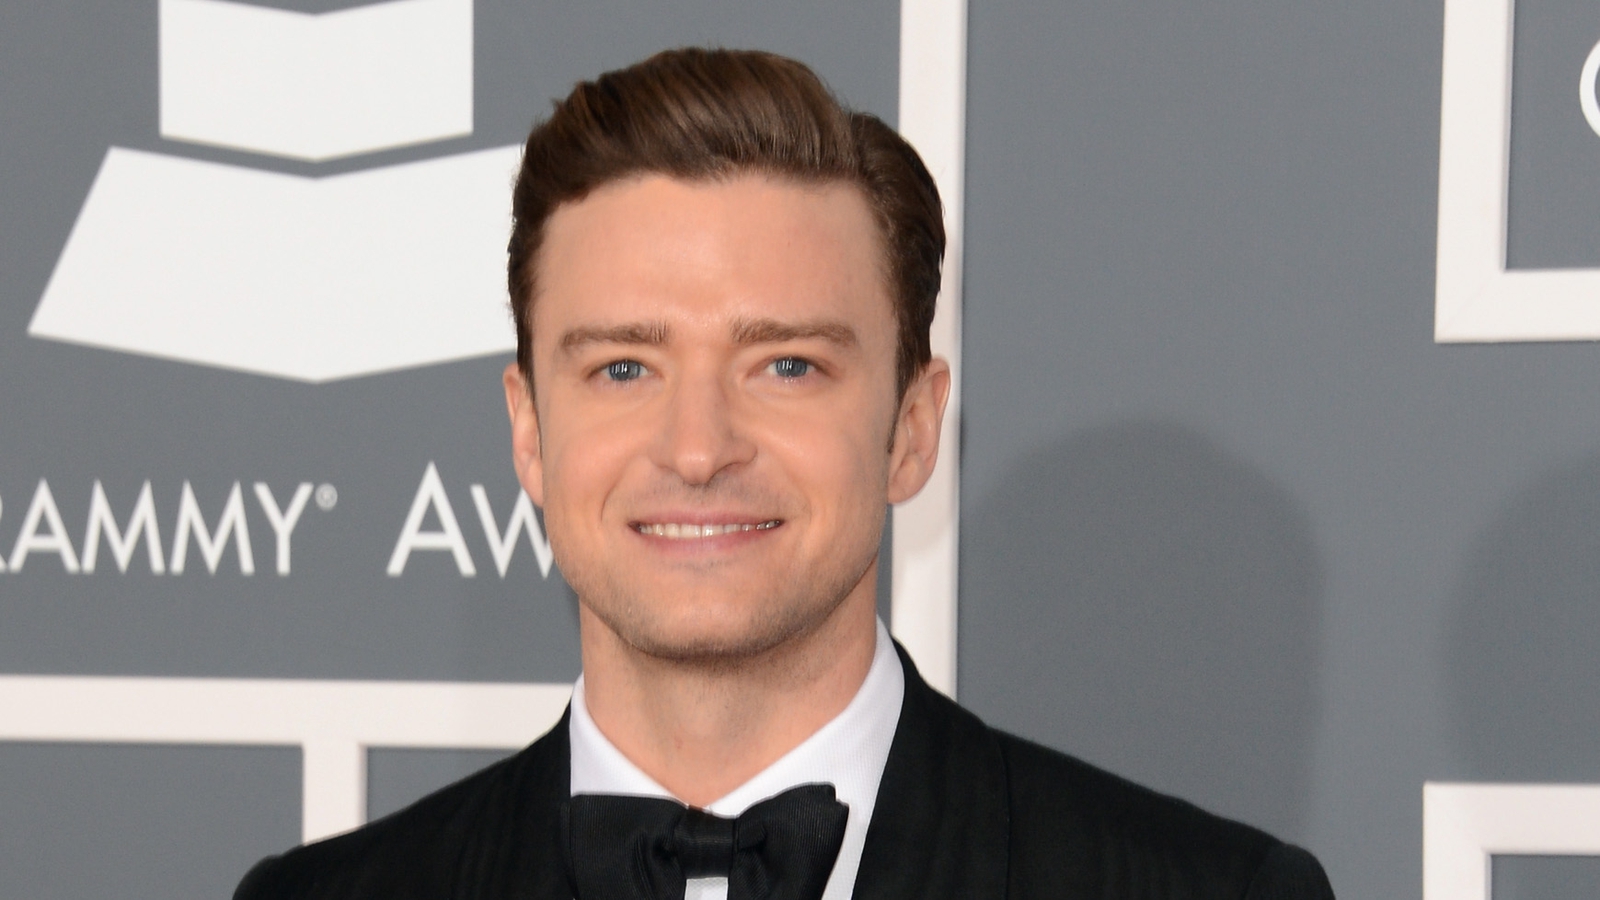 Grammys 2013: Justin Timberlake makes a triumphant return and